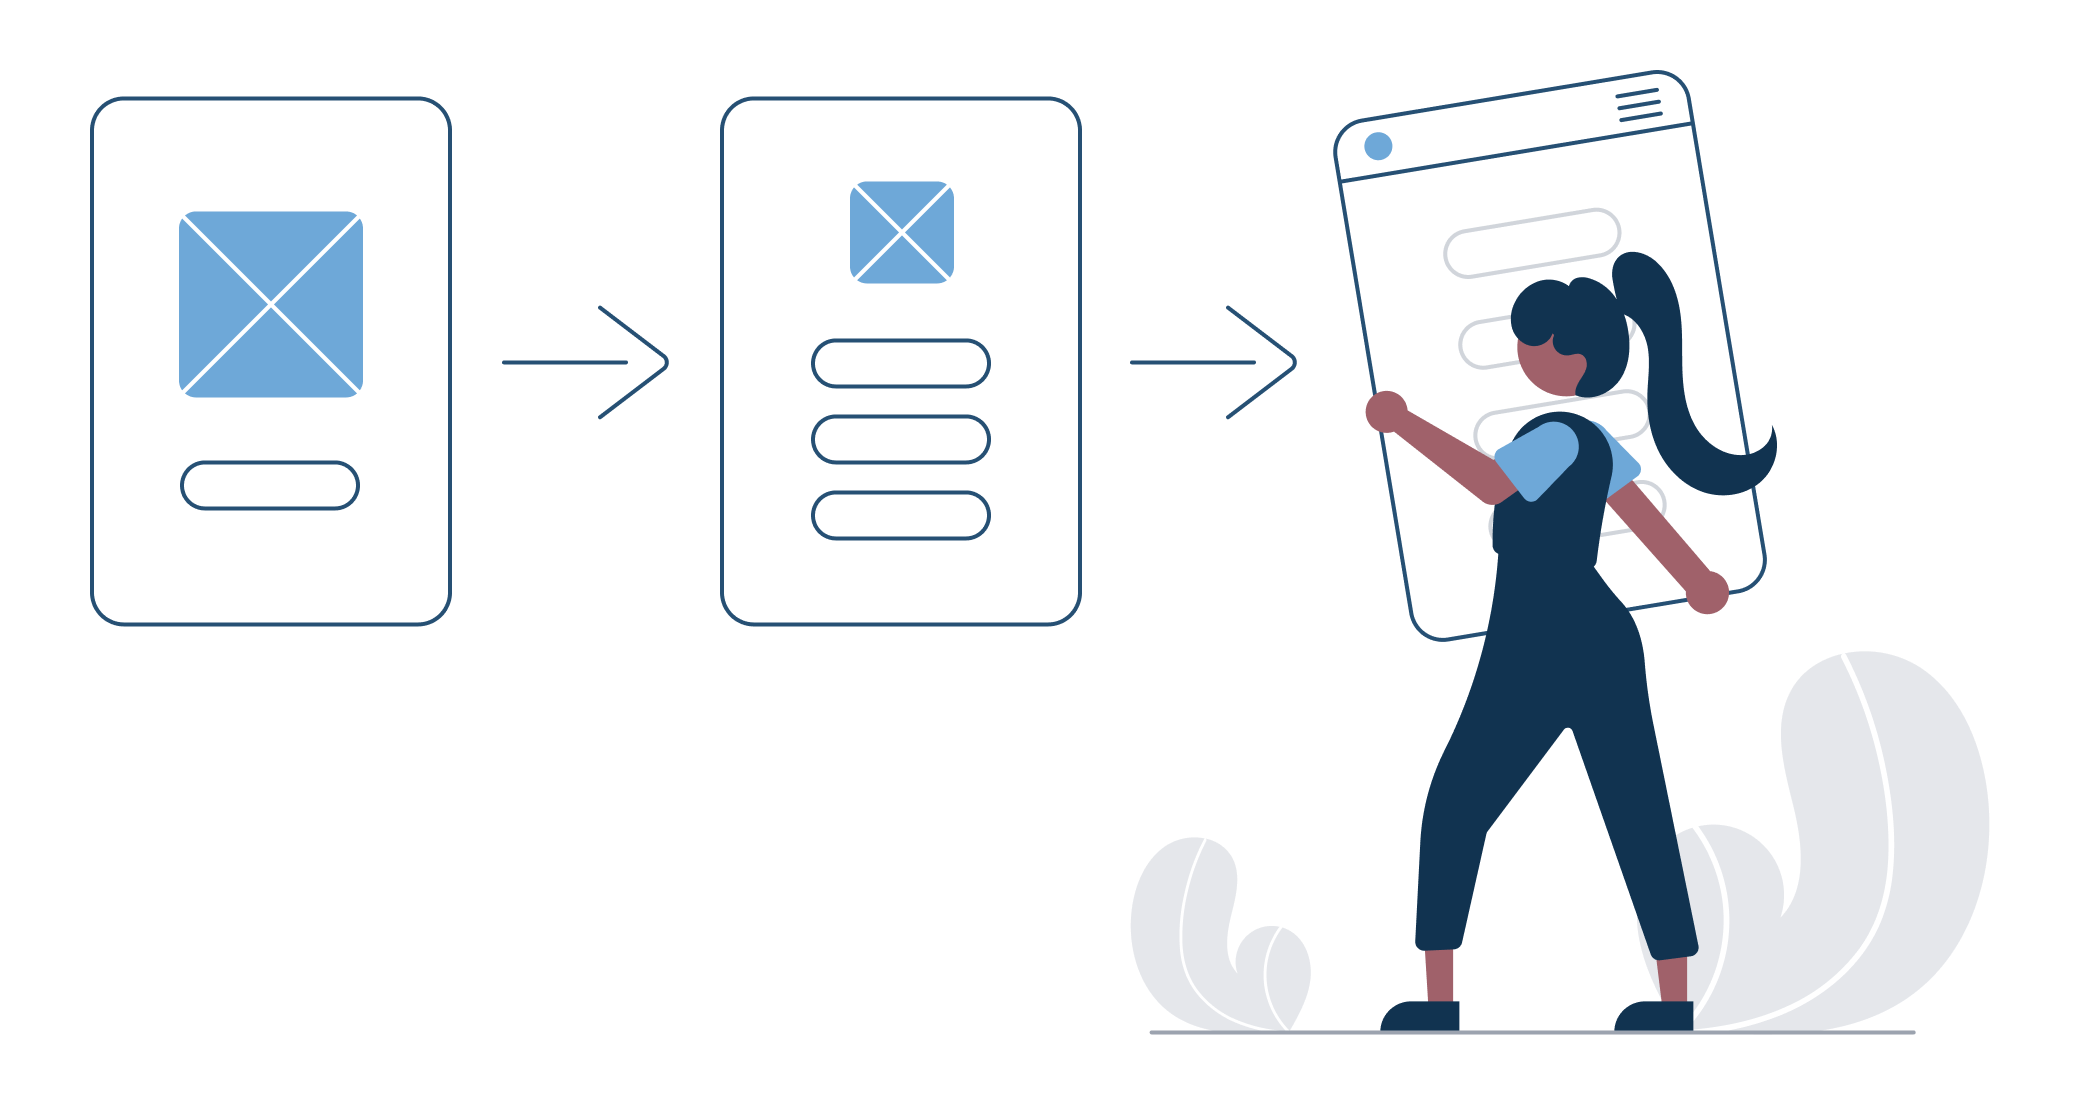 Illustration of a figure holding an abstract interface element that is the last in a three step process